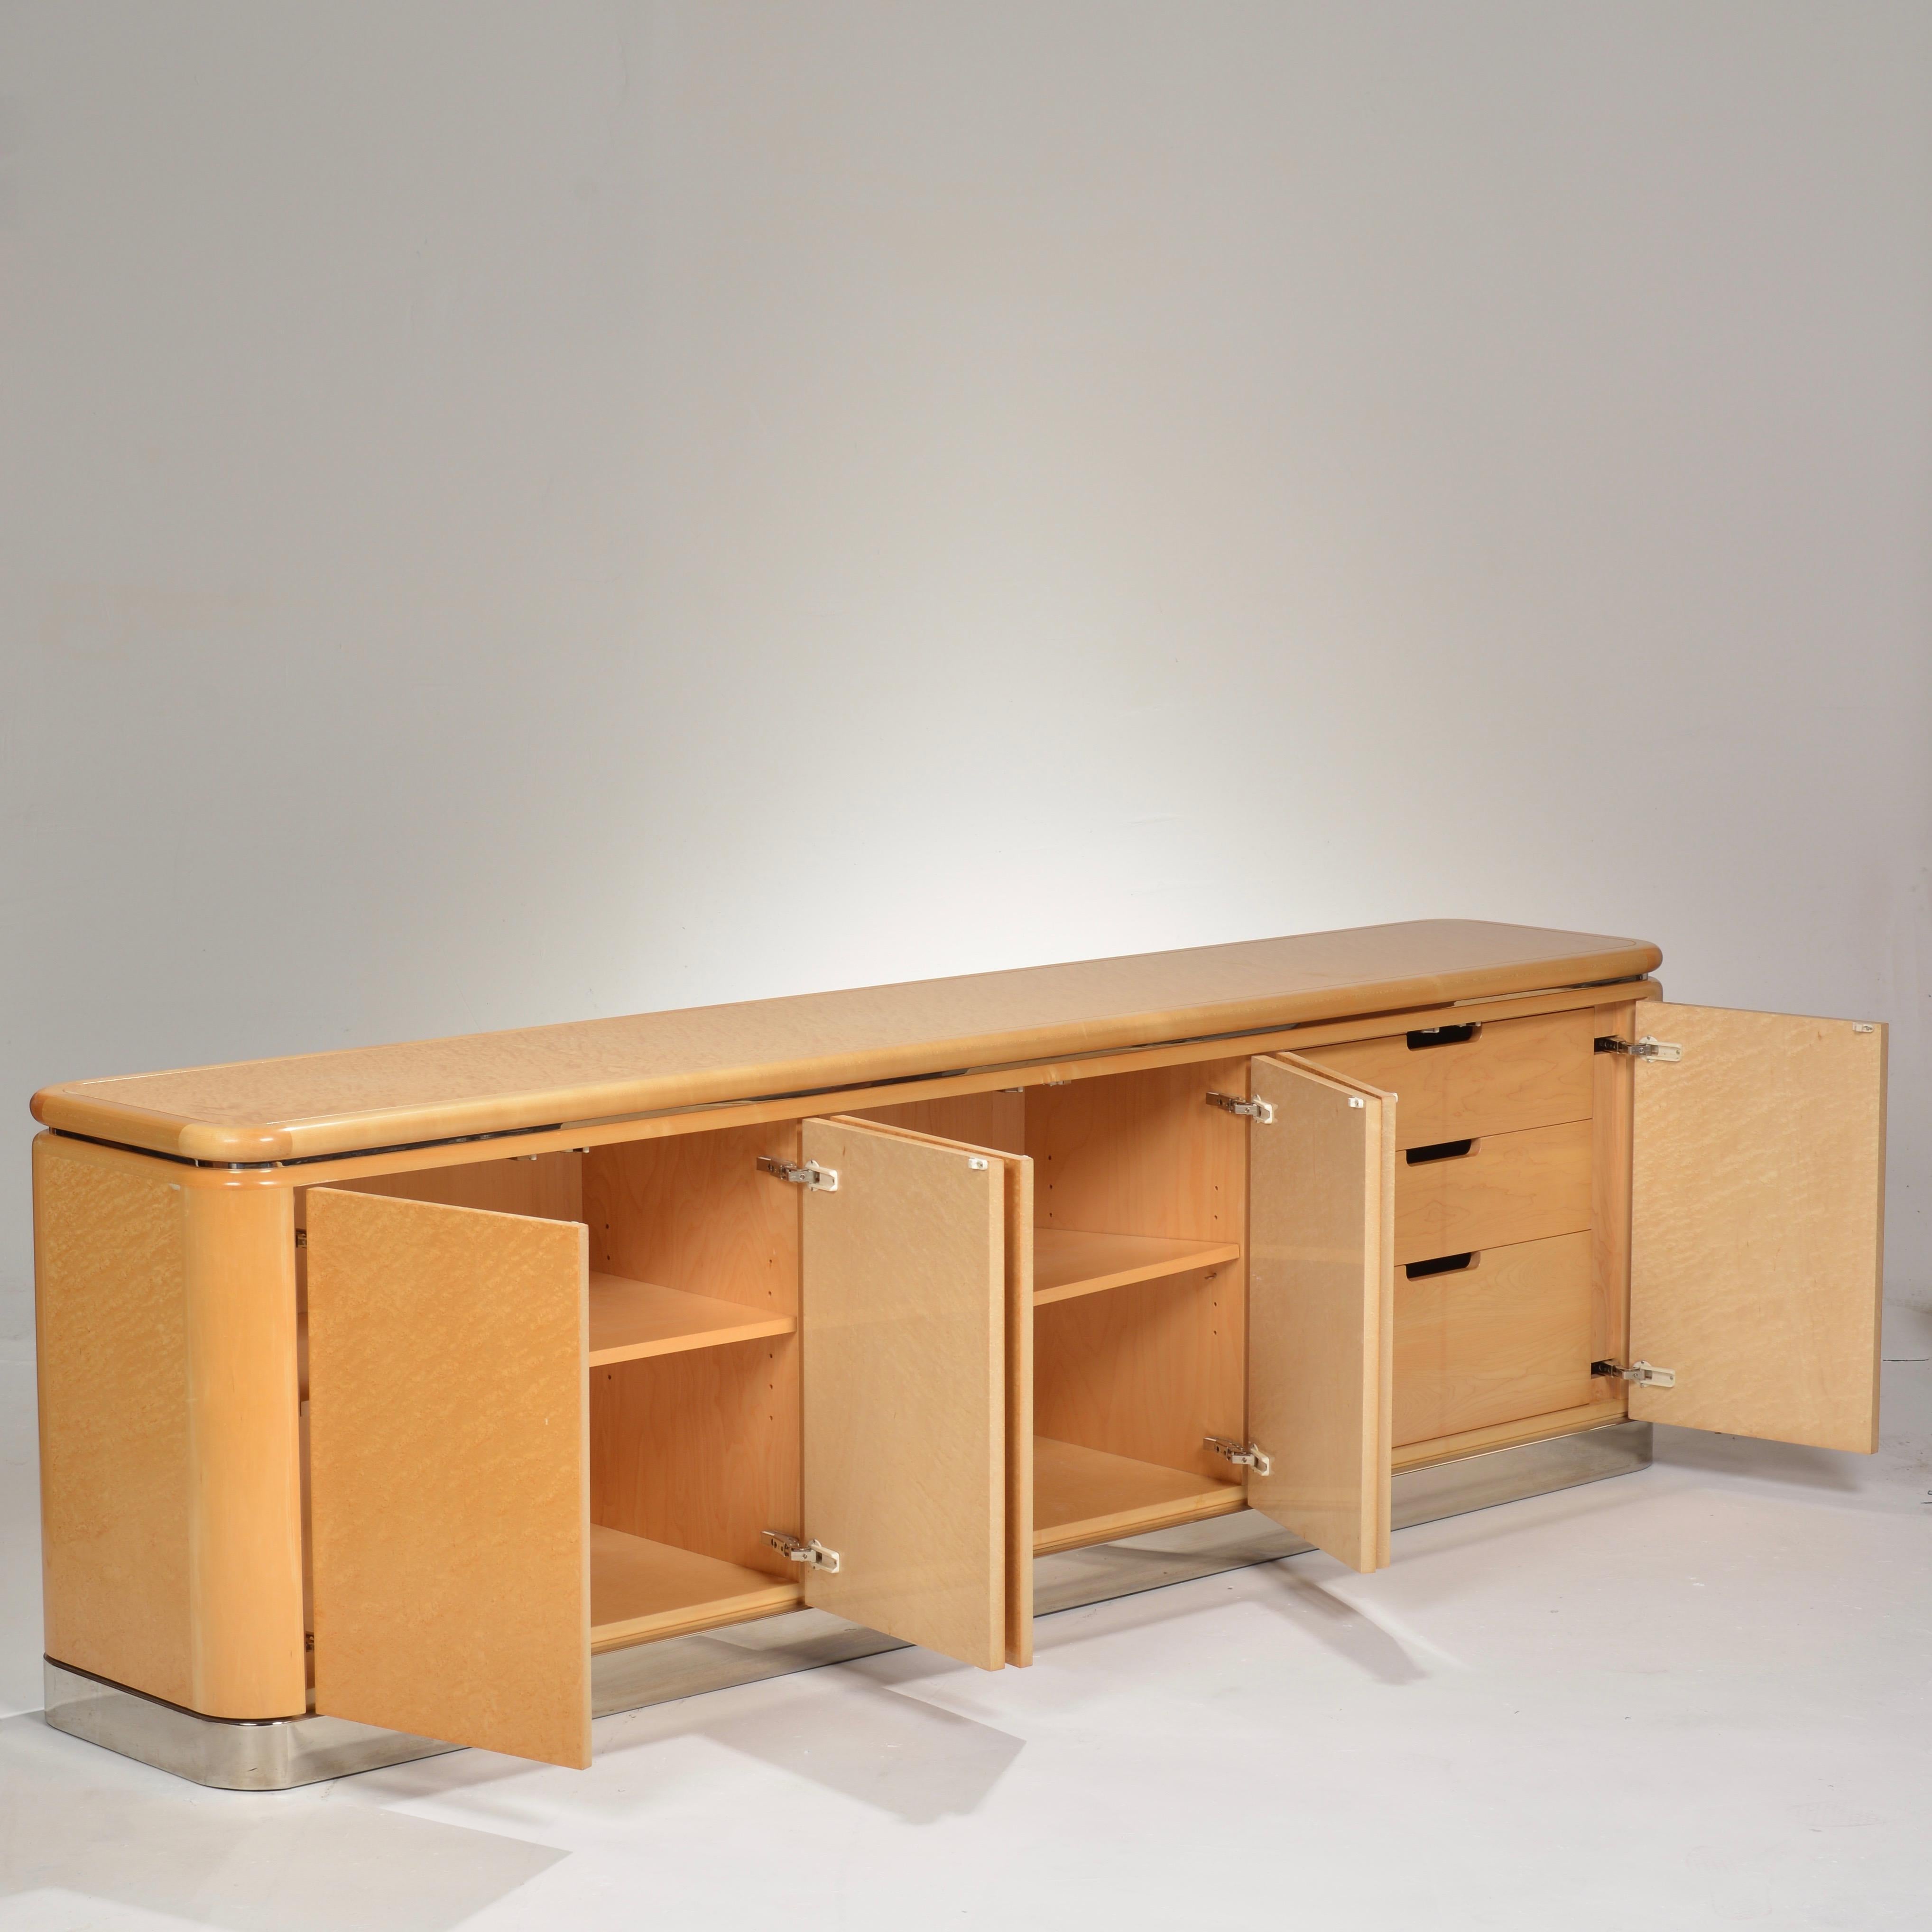 A beautiful 8' long credenza designed by Stanley Jay Friedman for Brueton featuring beautifully selected fiddleback maple handmade cabinetry, a polished stainless steel base, six doors, adjustable shelves, storage drawers and a finished back. This